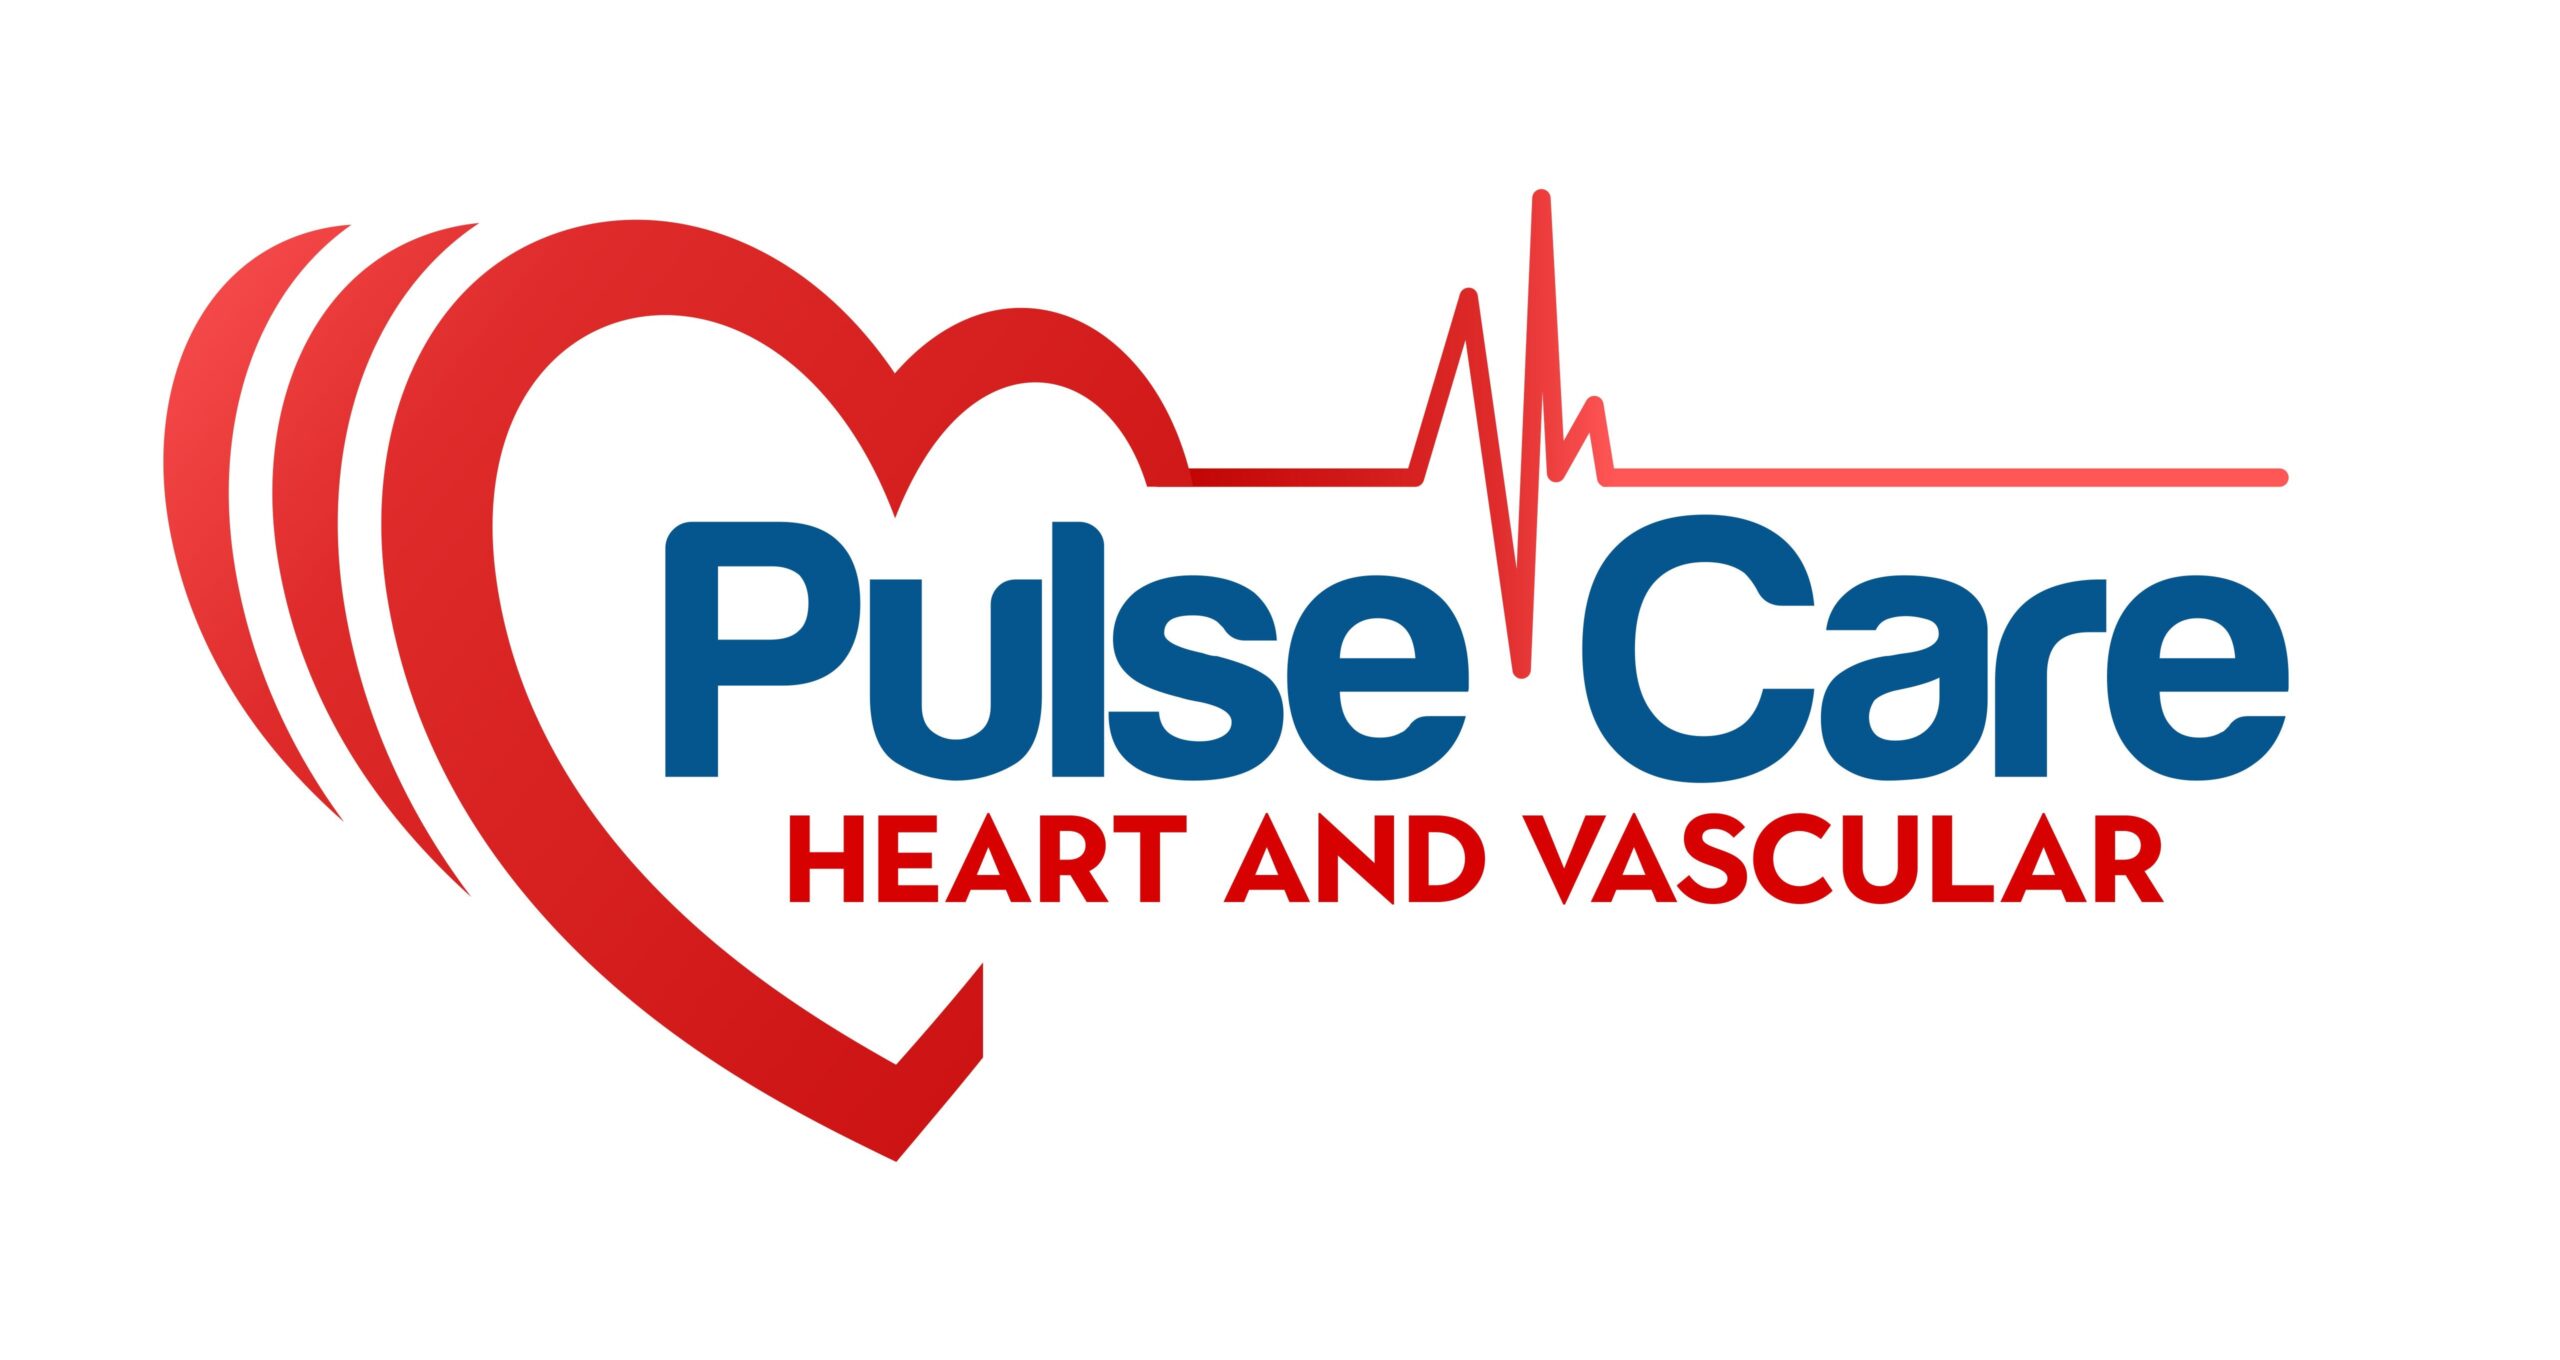 Pulse Care Heart and Vascular